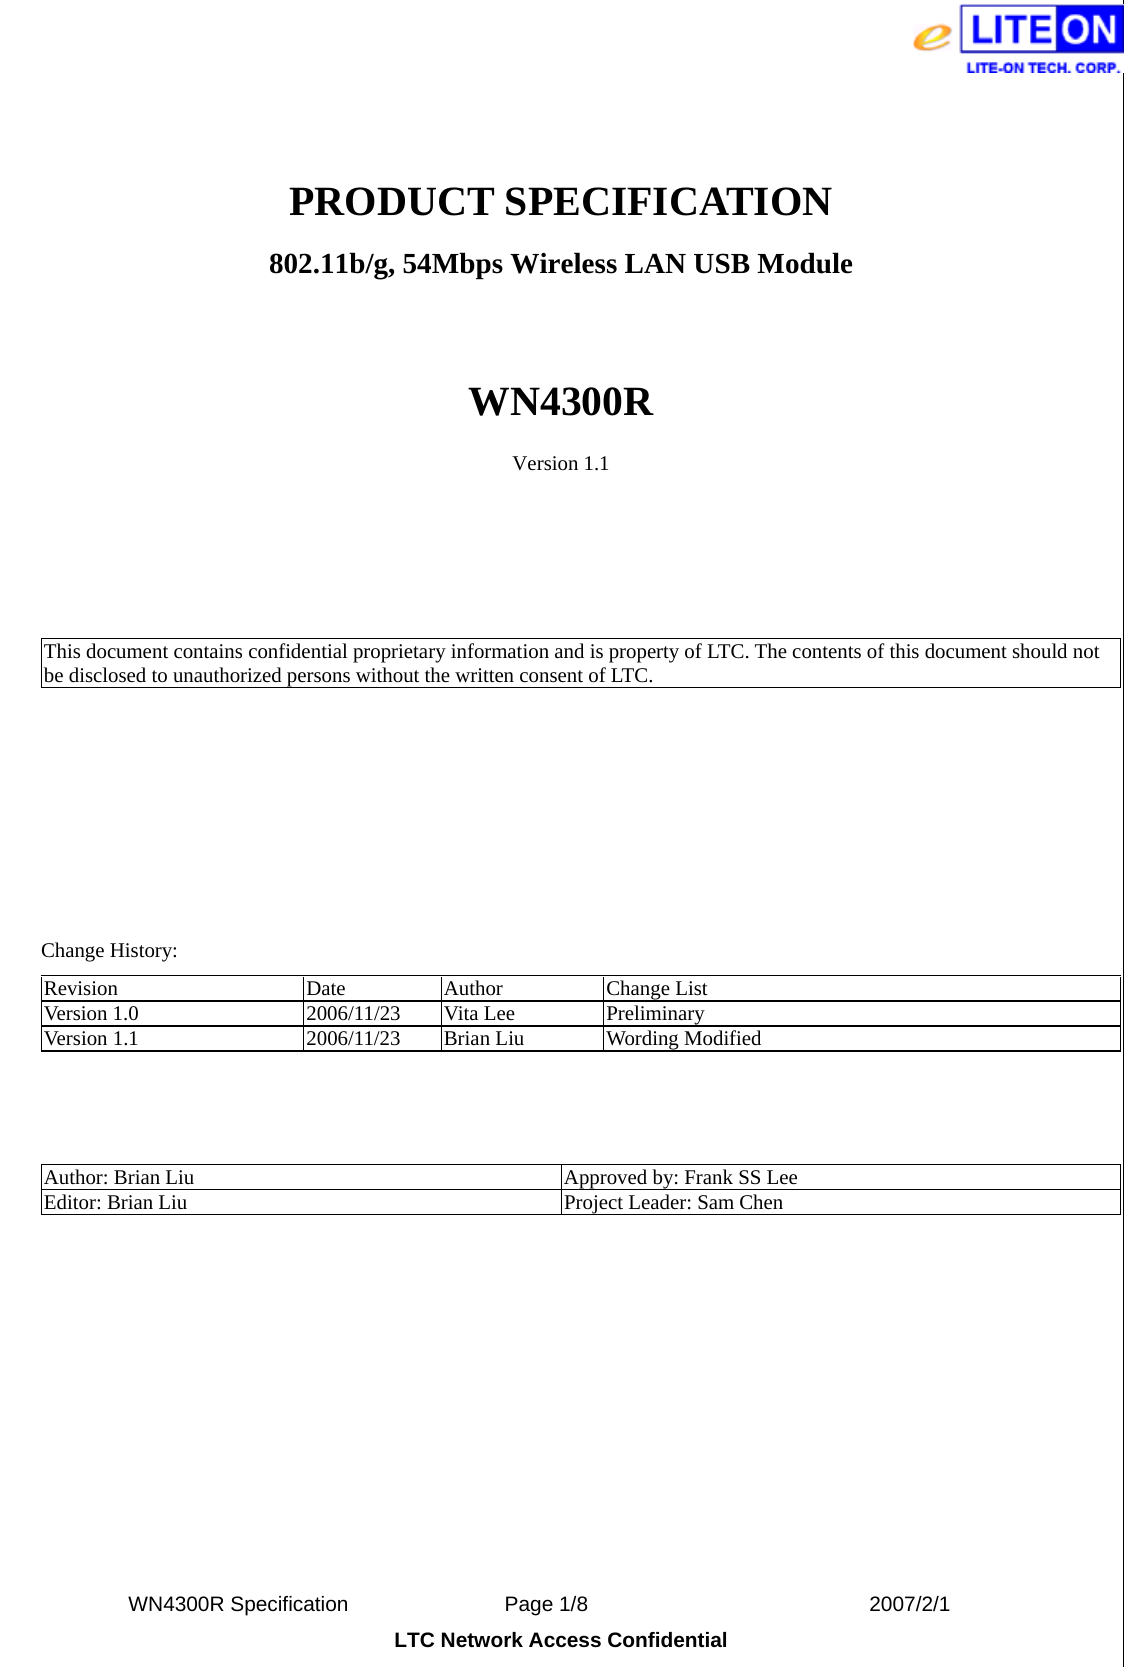  WN4300R Specification               Page 1/8                           2007/2/1 LTC Network Access Confidential  PRODUCT SPECIFICATION 802.11b/g, 54Mbps Wireless LAN USB Module  WN4300R Version 1.1     This document contains confidential proprietary information and is property of LTC. The contents of this document should not be disclosed to unauthorized persons without the written consent of LTC.             Change History: Revision Date Author Change List Version 1.0  2006/11/23  Vita Lee  Preliminary Version 1.1  2006/11/23  Brian Liu  Wording Modified    Author: Brian Liu  Approved by: Frank SS Lee Editor: Brian Liu  Project Leader: Sam Chen  